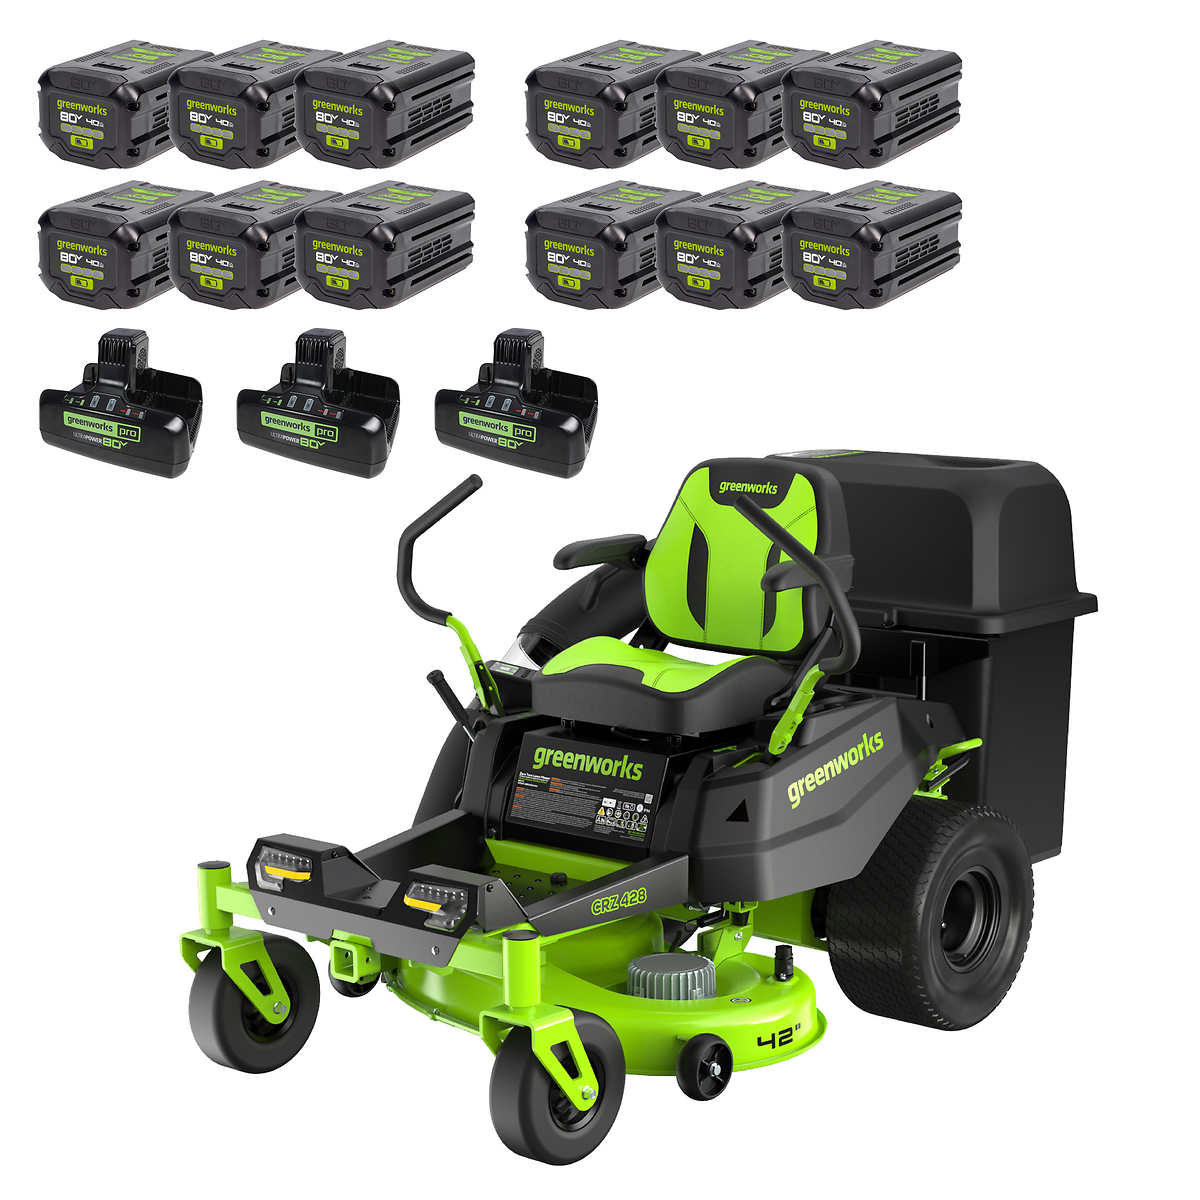 Greenworks 80V 42" Crossover Zero Turn with Bagger, 12 4AH Batteries and 3 Dual Port Rapid Chargers @ Costco $5500